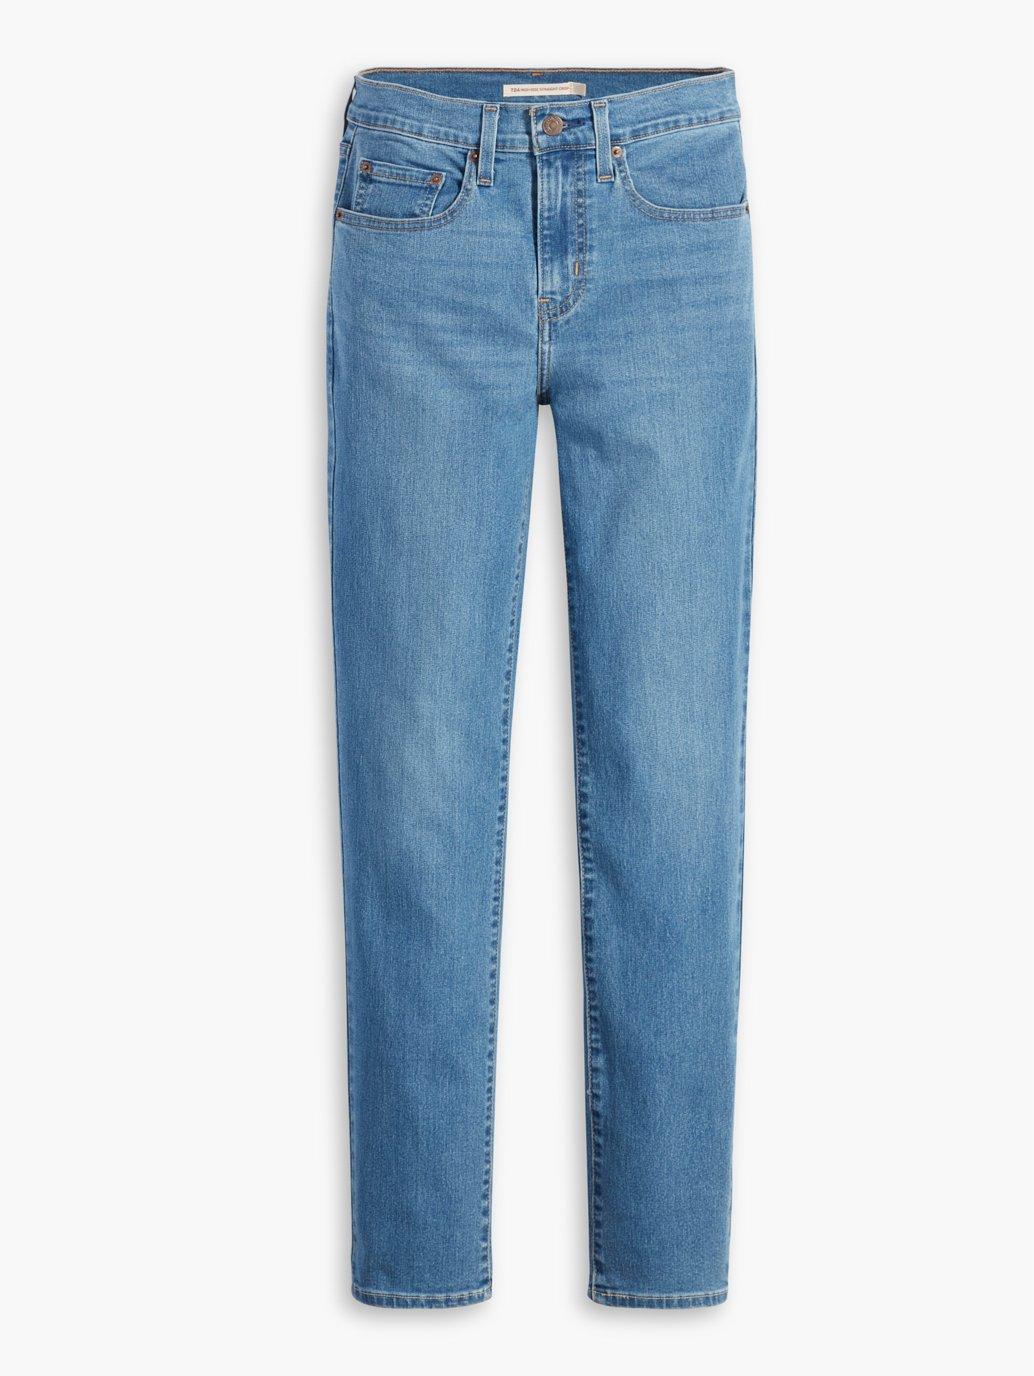 Buy Levi's® Women's 724 High-Rise Straight Cropped Jeans | Levi’s ...